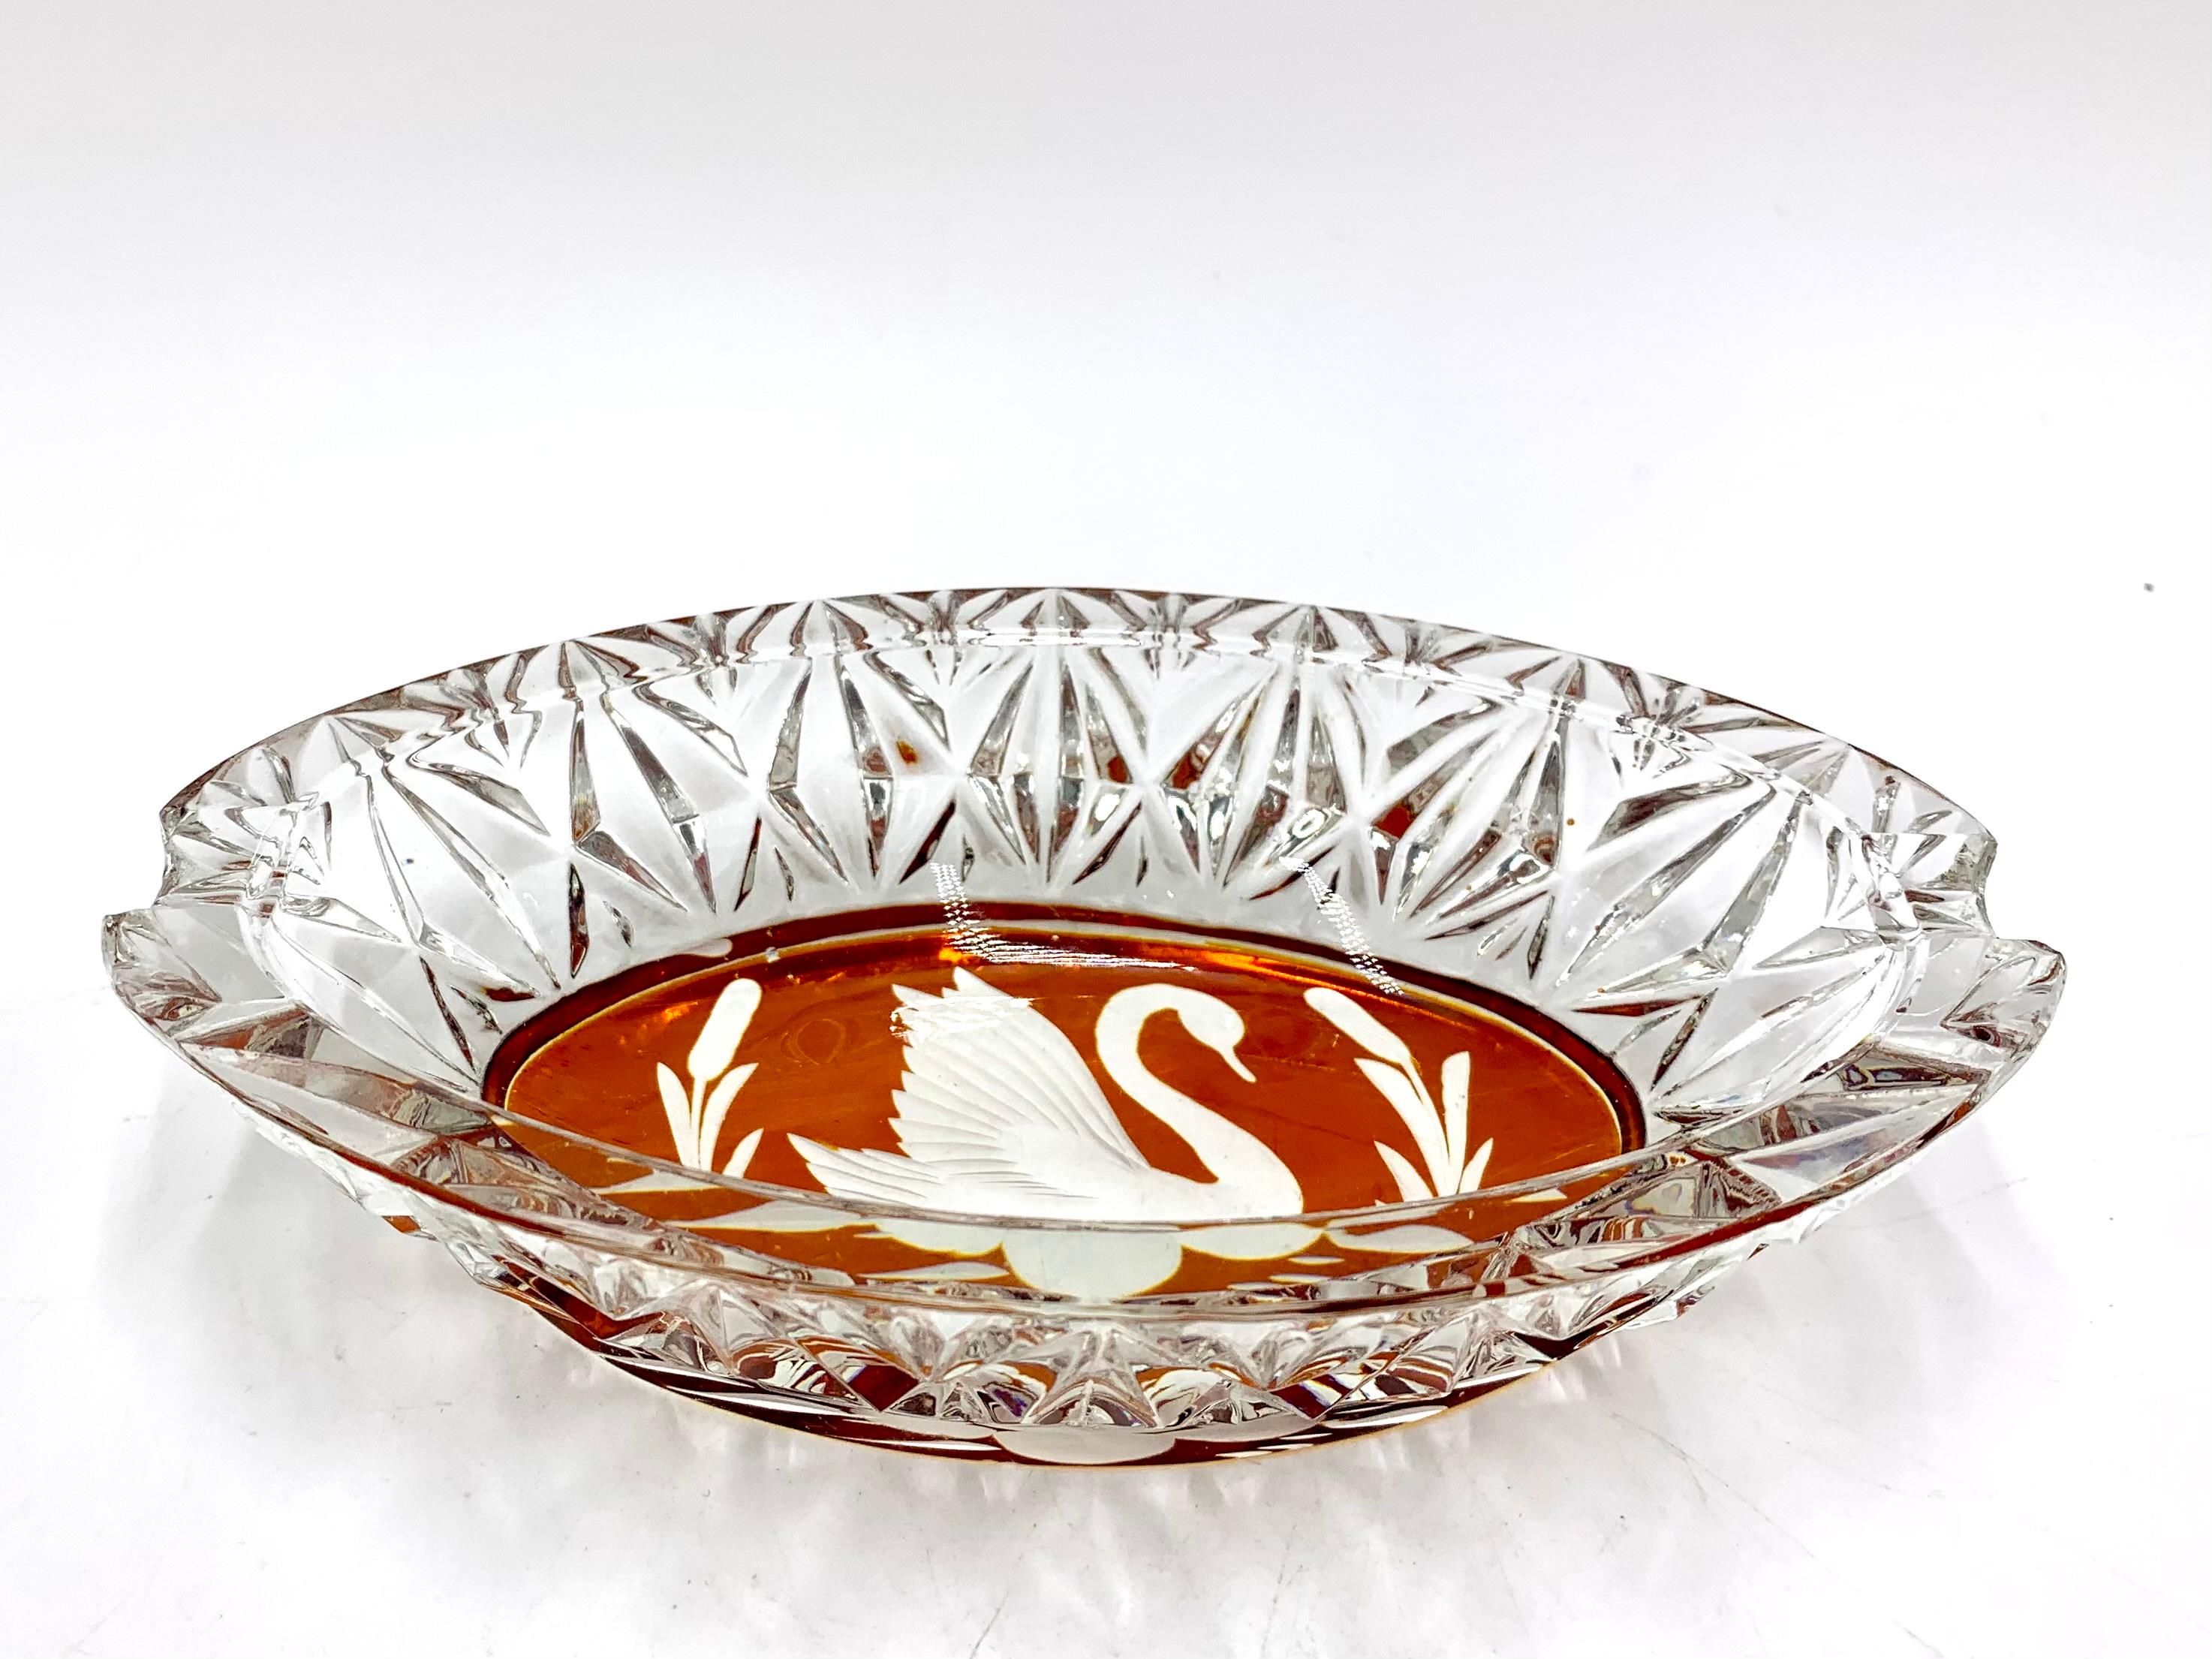 Vintage crystal ashtray

Produced in Poland in the 1960s by the Julia Glassworks

Very good condition

Measures: Height: 3.5cm

Width: 16cm.